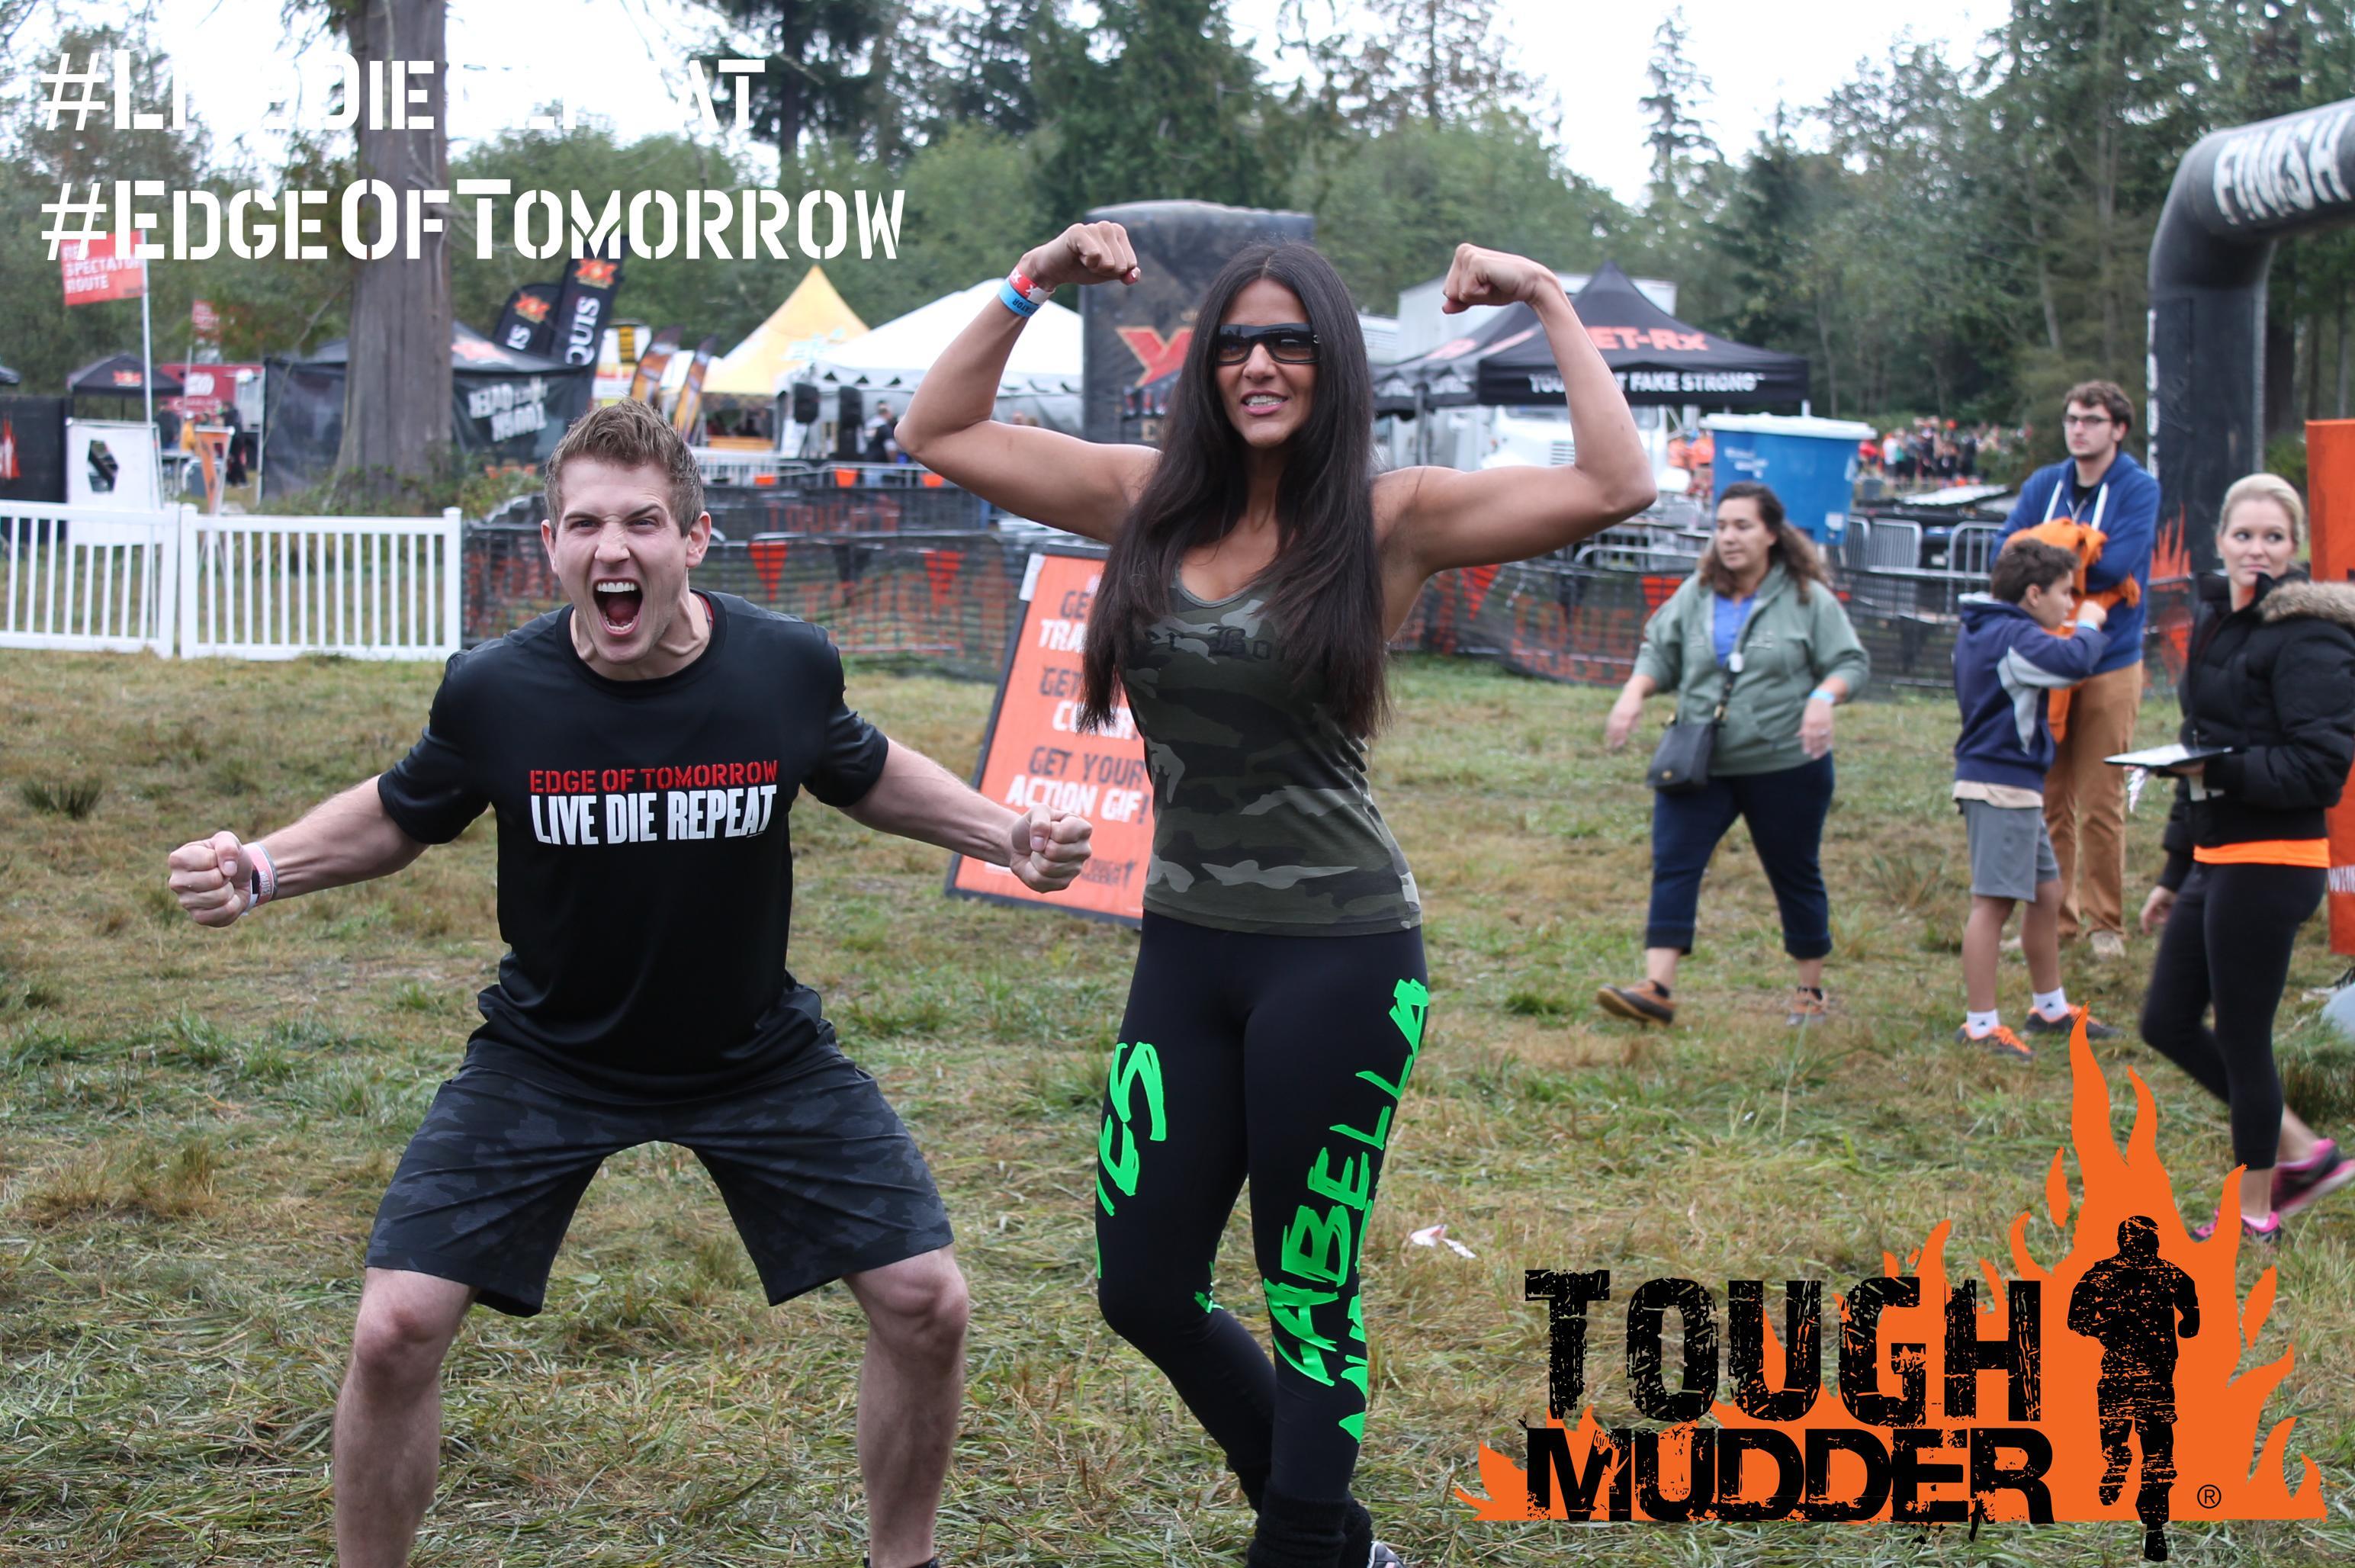 Erica and I with the Warner Bros. Edge Of Tomorrow Team in Seattle, WA about to run Tough Mudder! #LiveDieRepeat